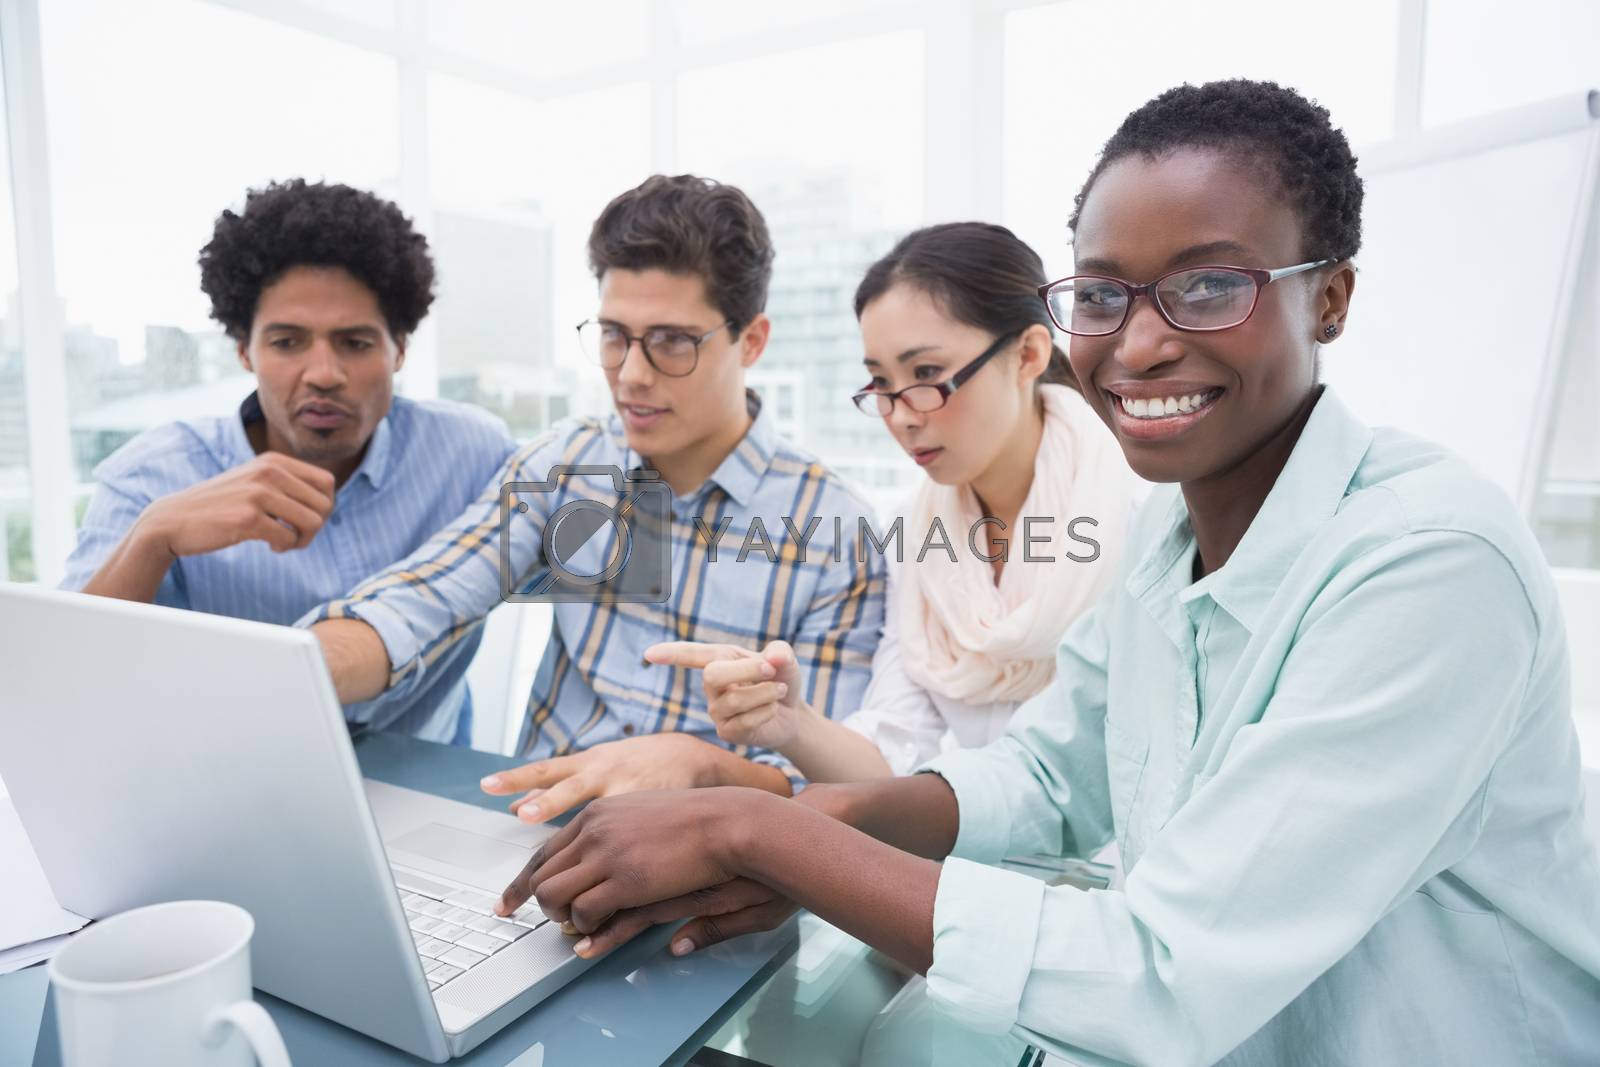 Royalty free image of Casual business team having a meeting using laptop by Wavebreakmedia